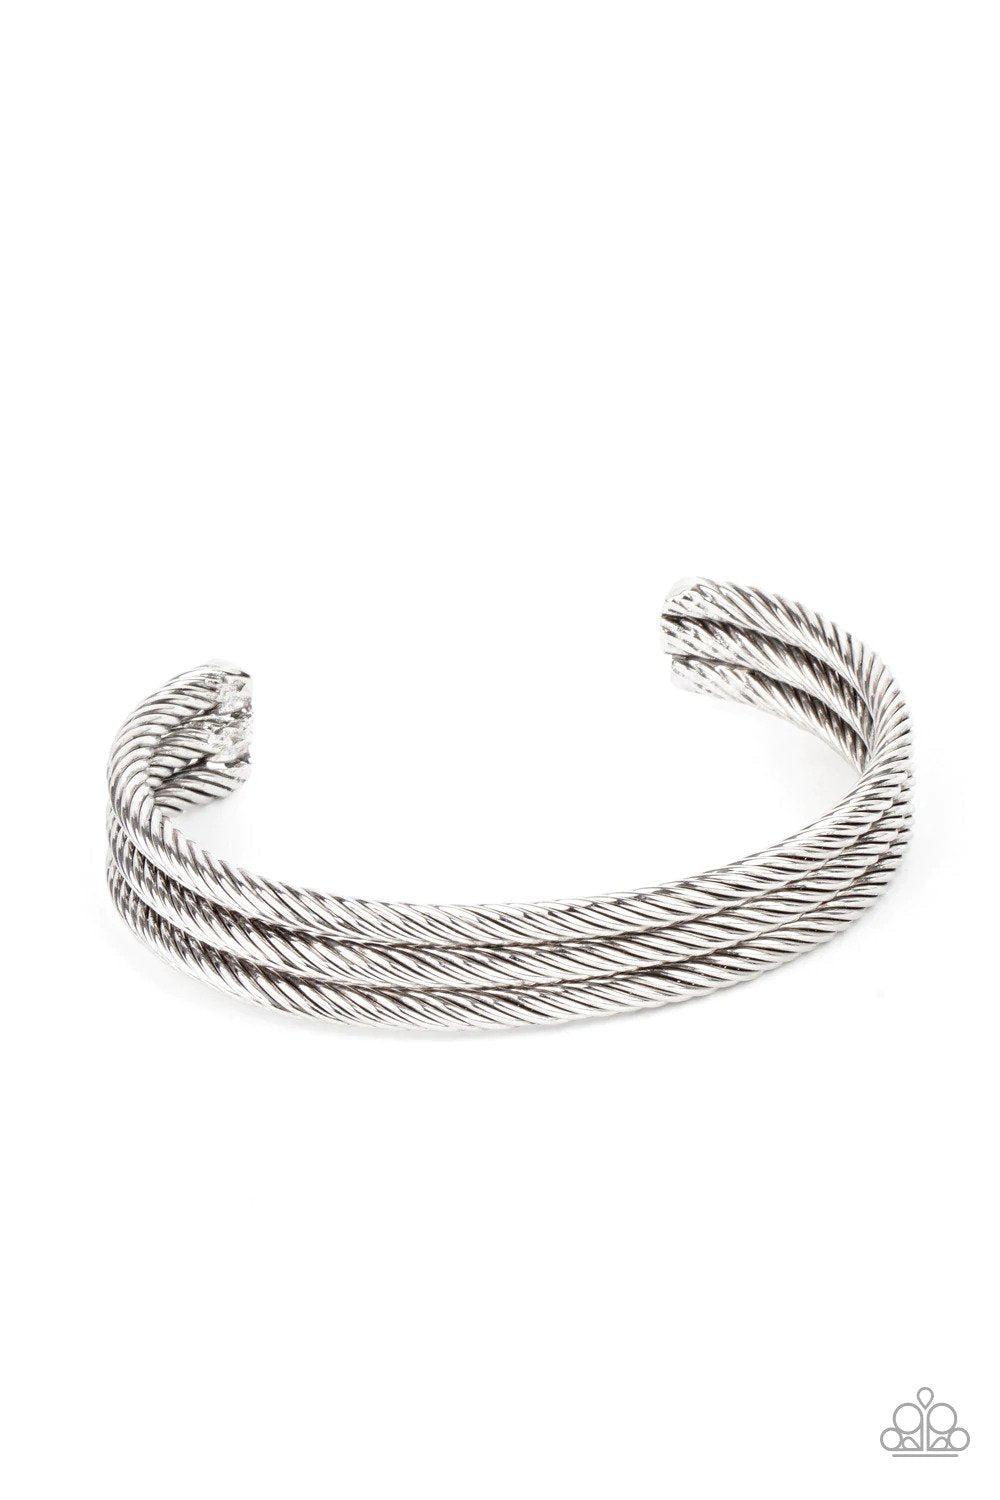 Armored Cable Men's Silver Cuff Bracelet - Paparazzi Accessories- lightbox - CarasShop.com - $5 Jewelry by Cara Jewels